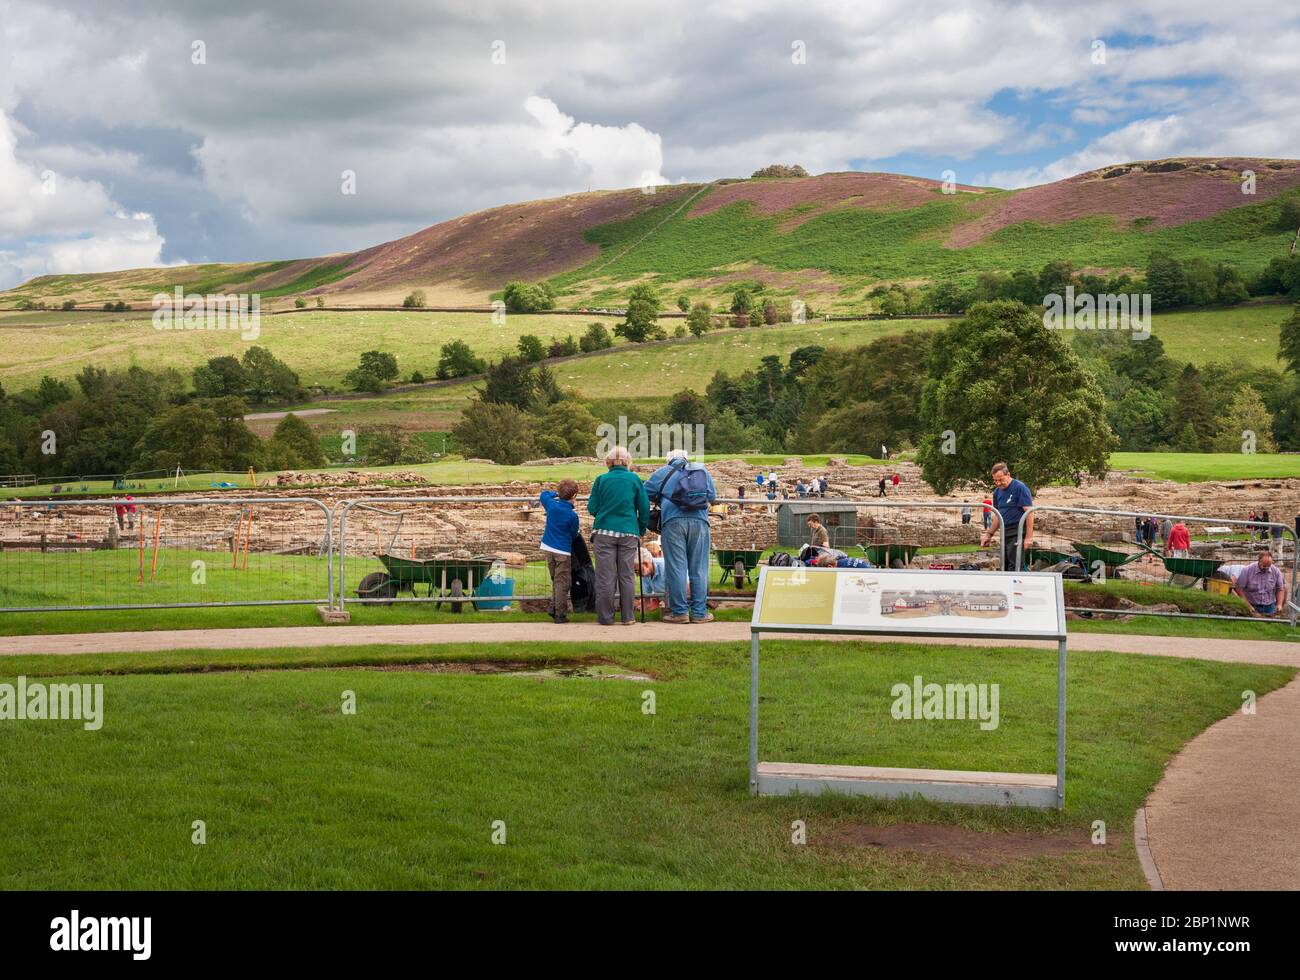 Archaeological dig - archaeologists undertake excavation at Vindolanda Roman Fort near Hadrian's Wall in Northumberland. Stock Photo